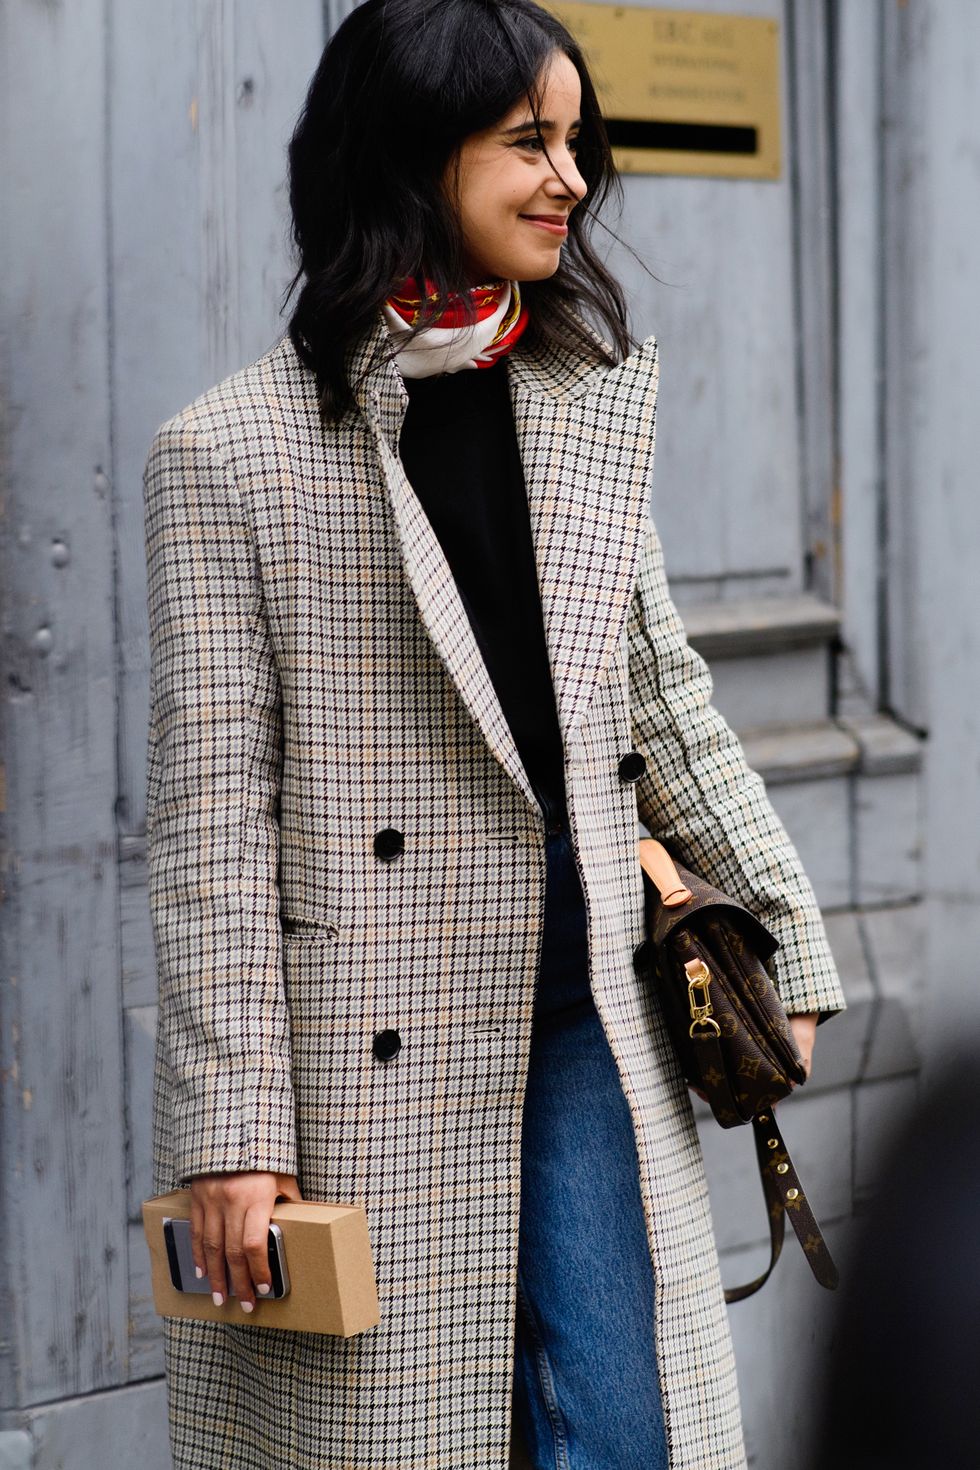 Ciao Milano! The Best Style From The Streets